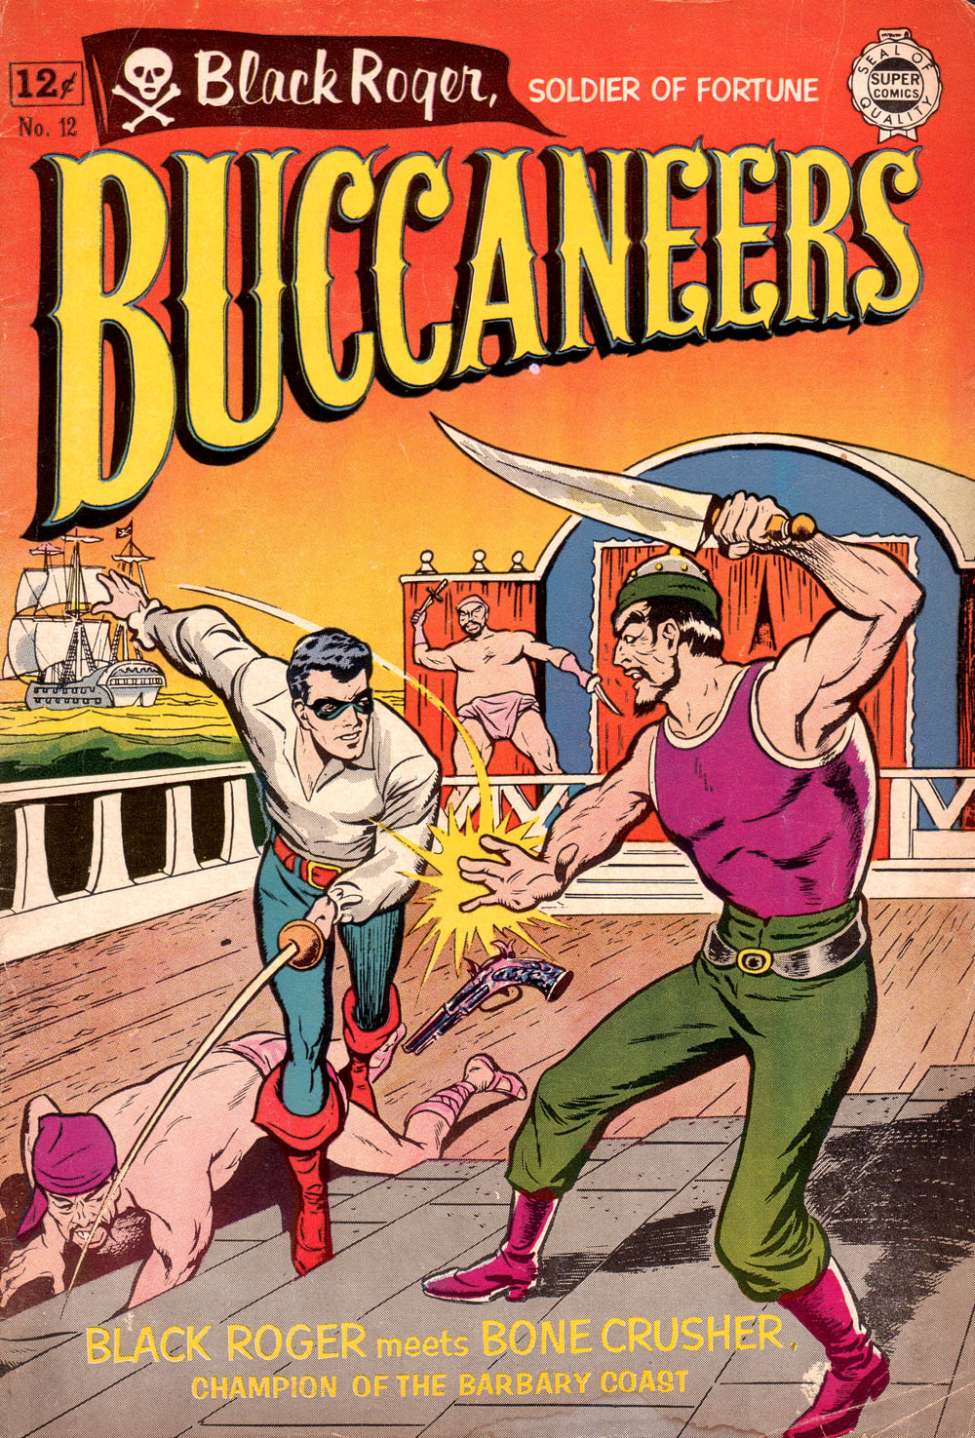 Book Cover For Buccaneers 12